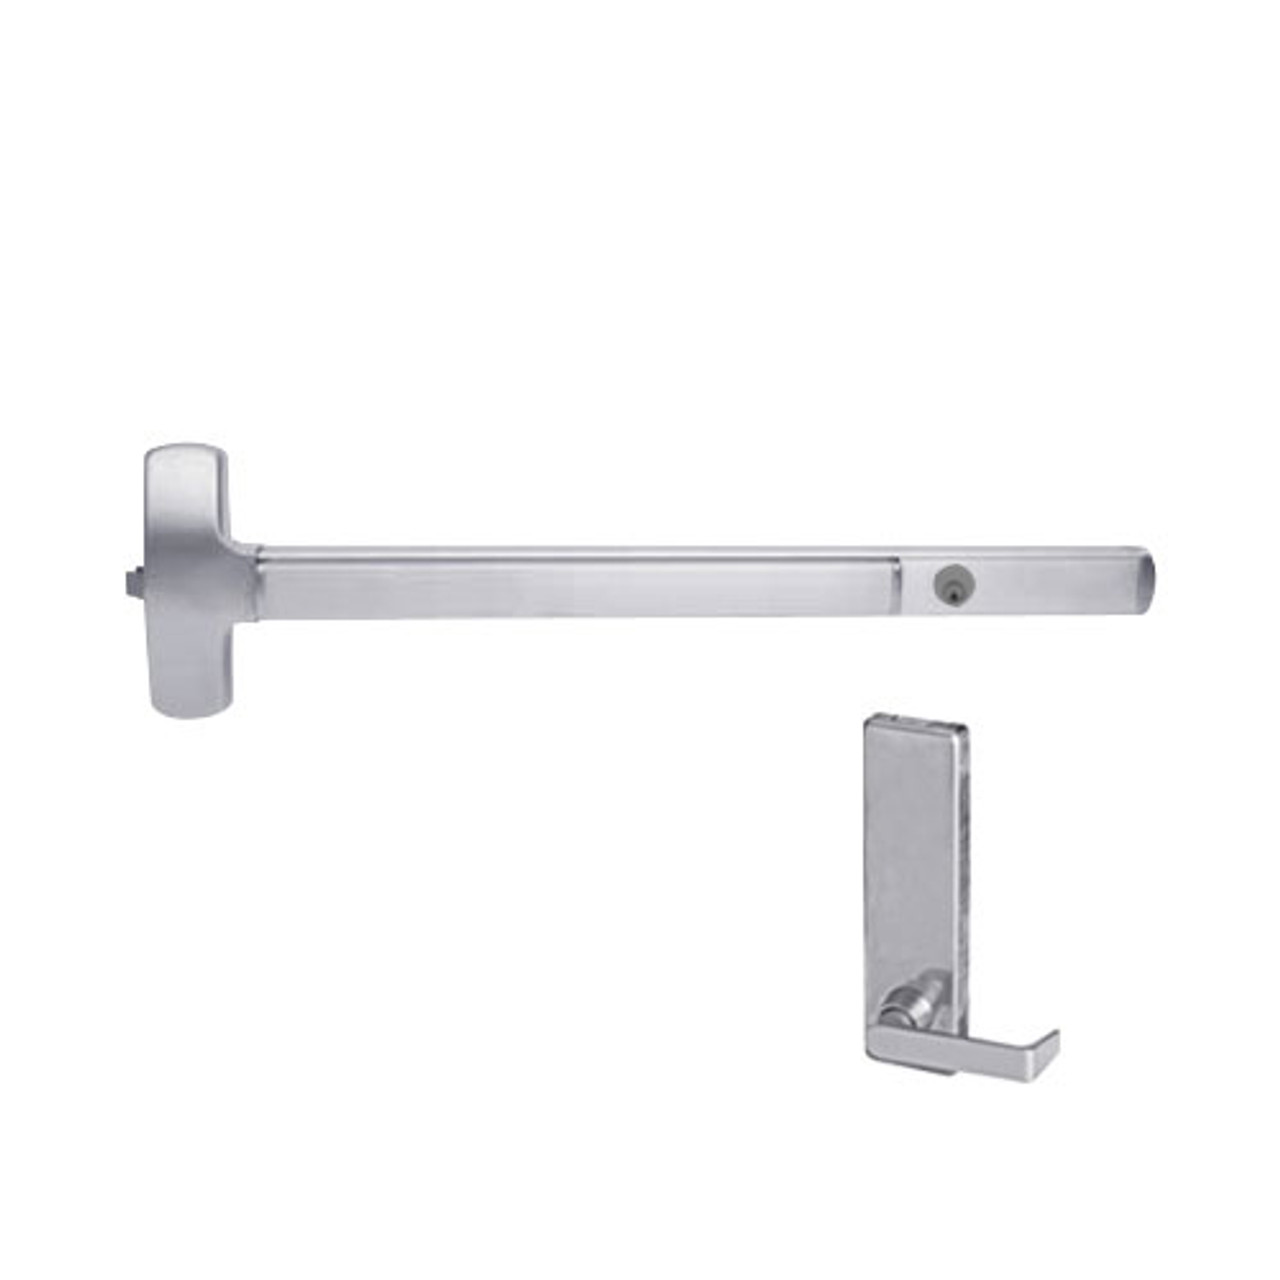 CD25-R-L-BE-DANE-US32-4-RHR Falcon Exit Device in Polished Stainless Steel